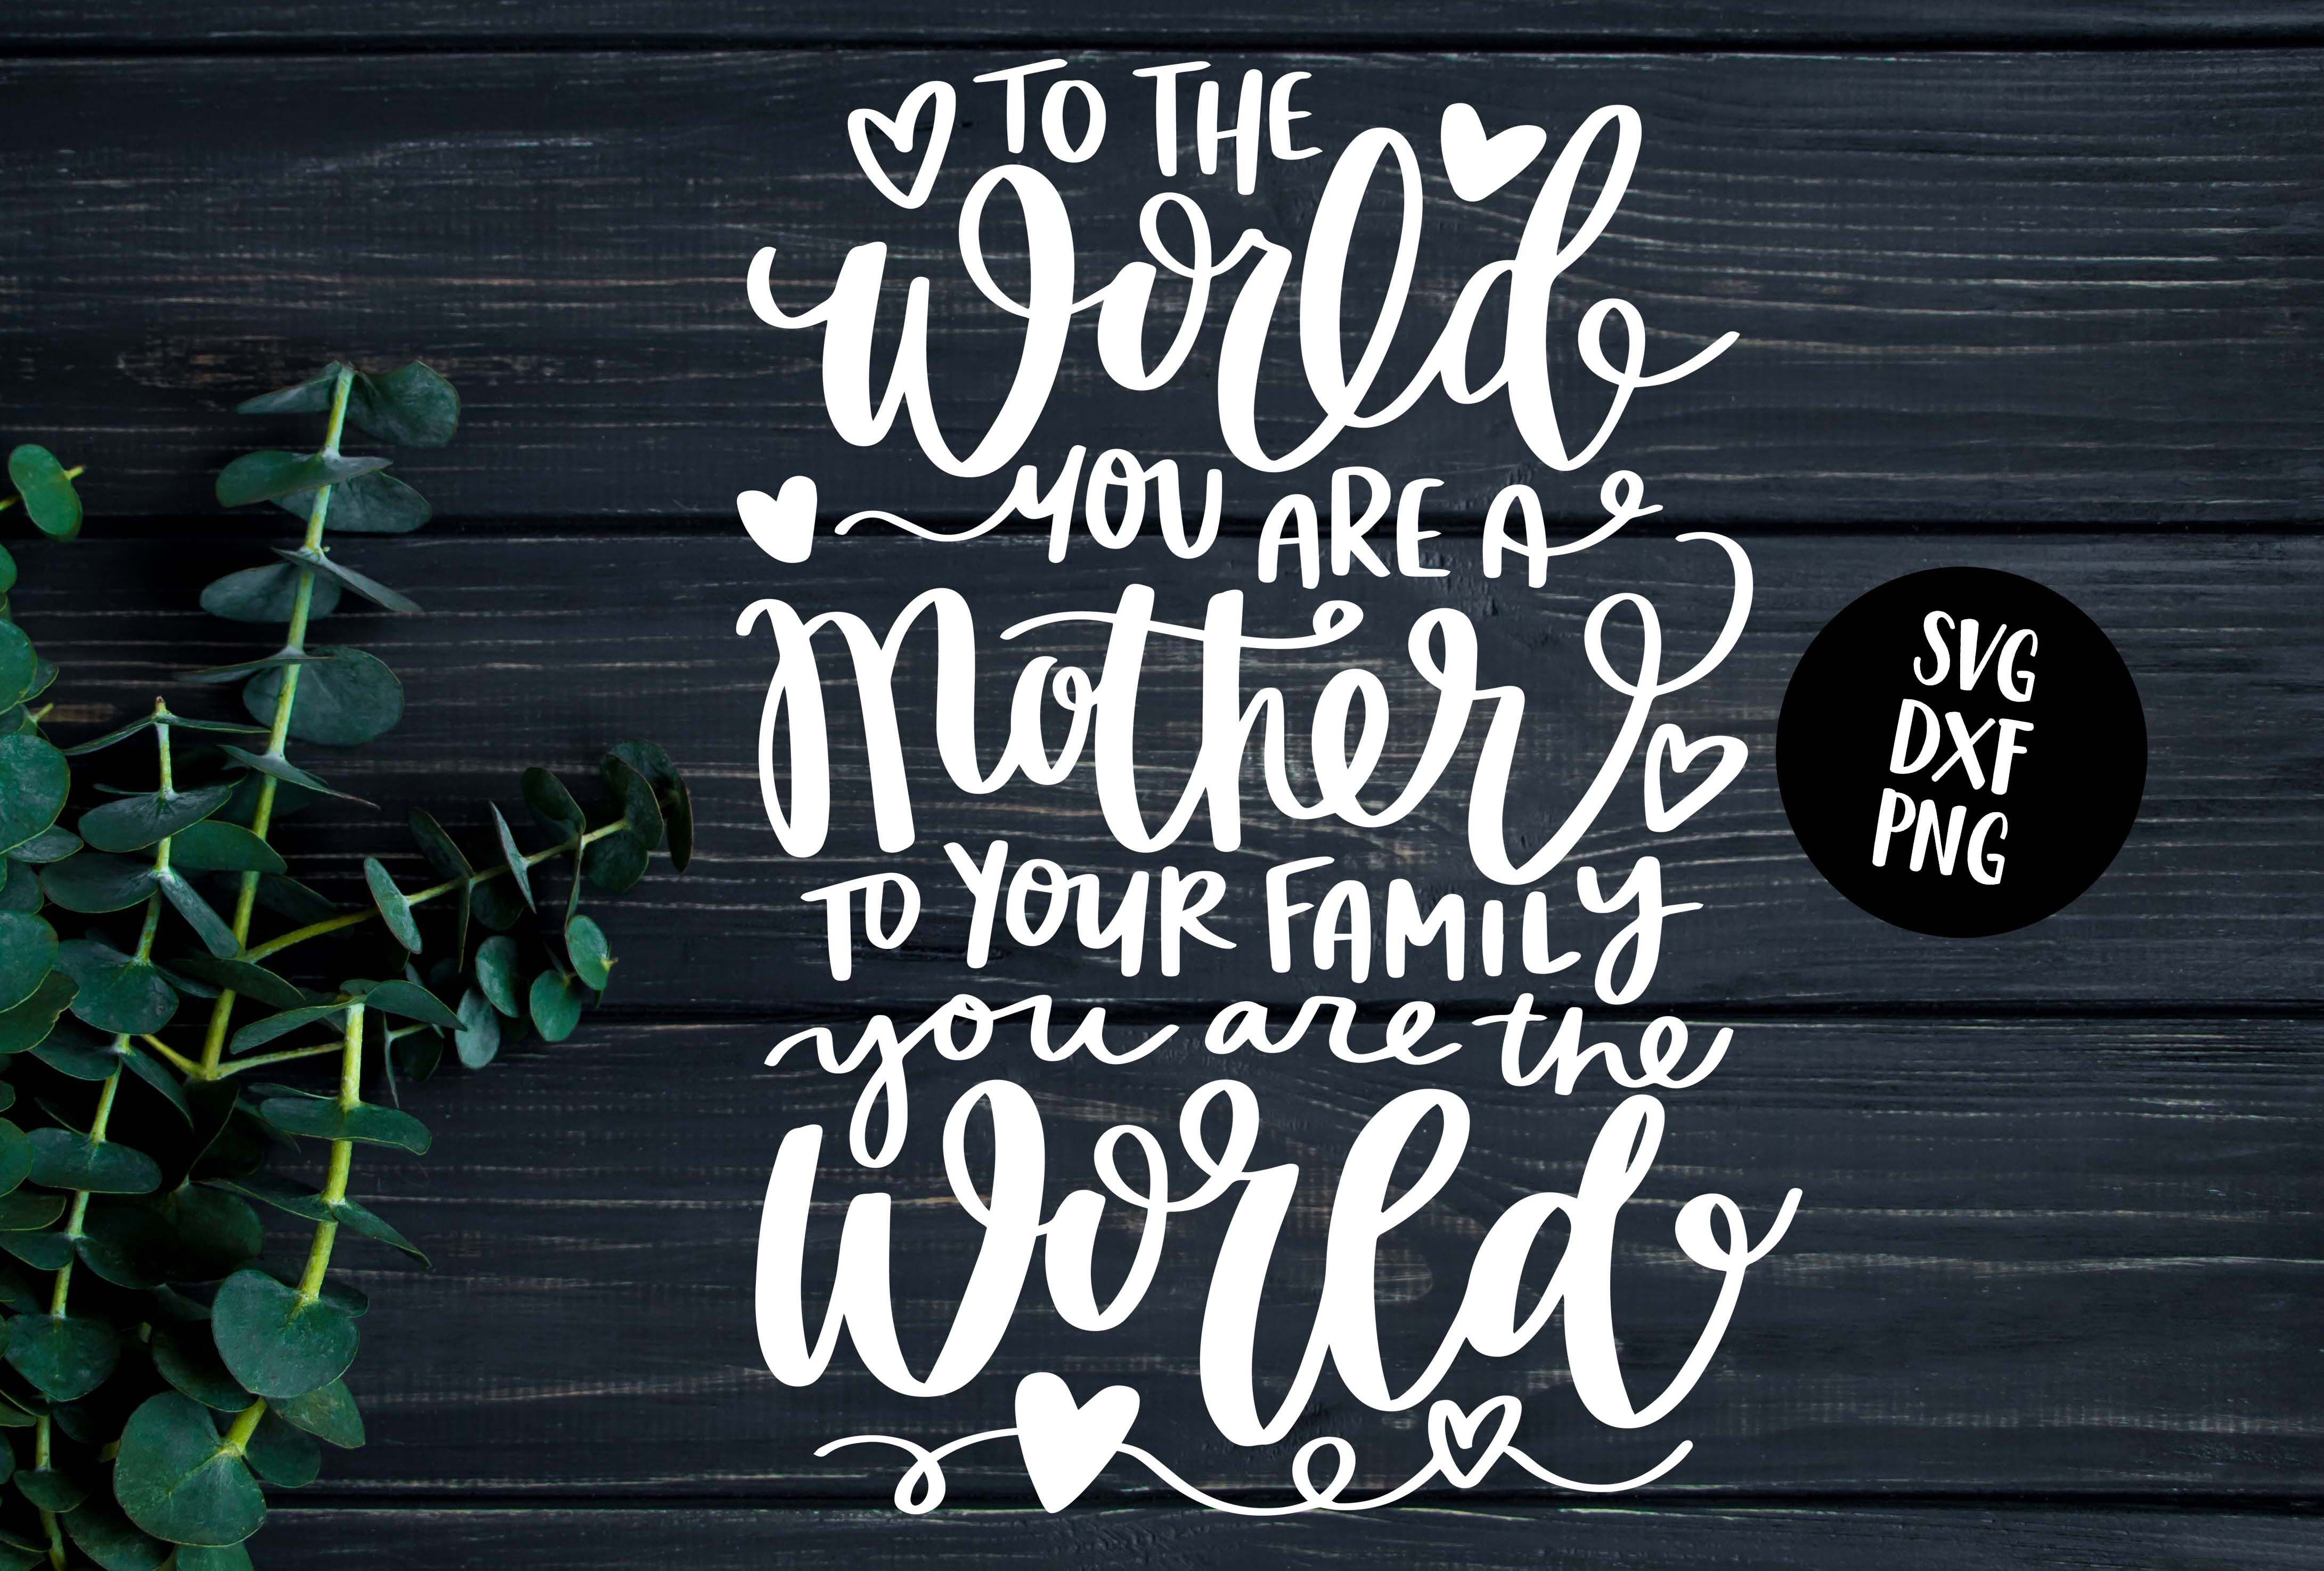 ori 3741246 80mbtmwrccfdyc1goaqhp2tnxr2h3lu74m1nujv4 to the world you are a mother hand lettered svg